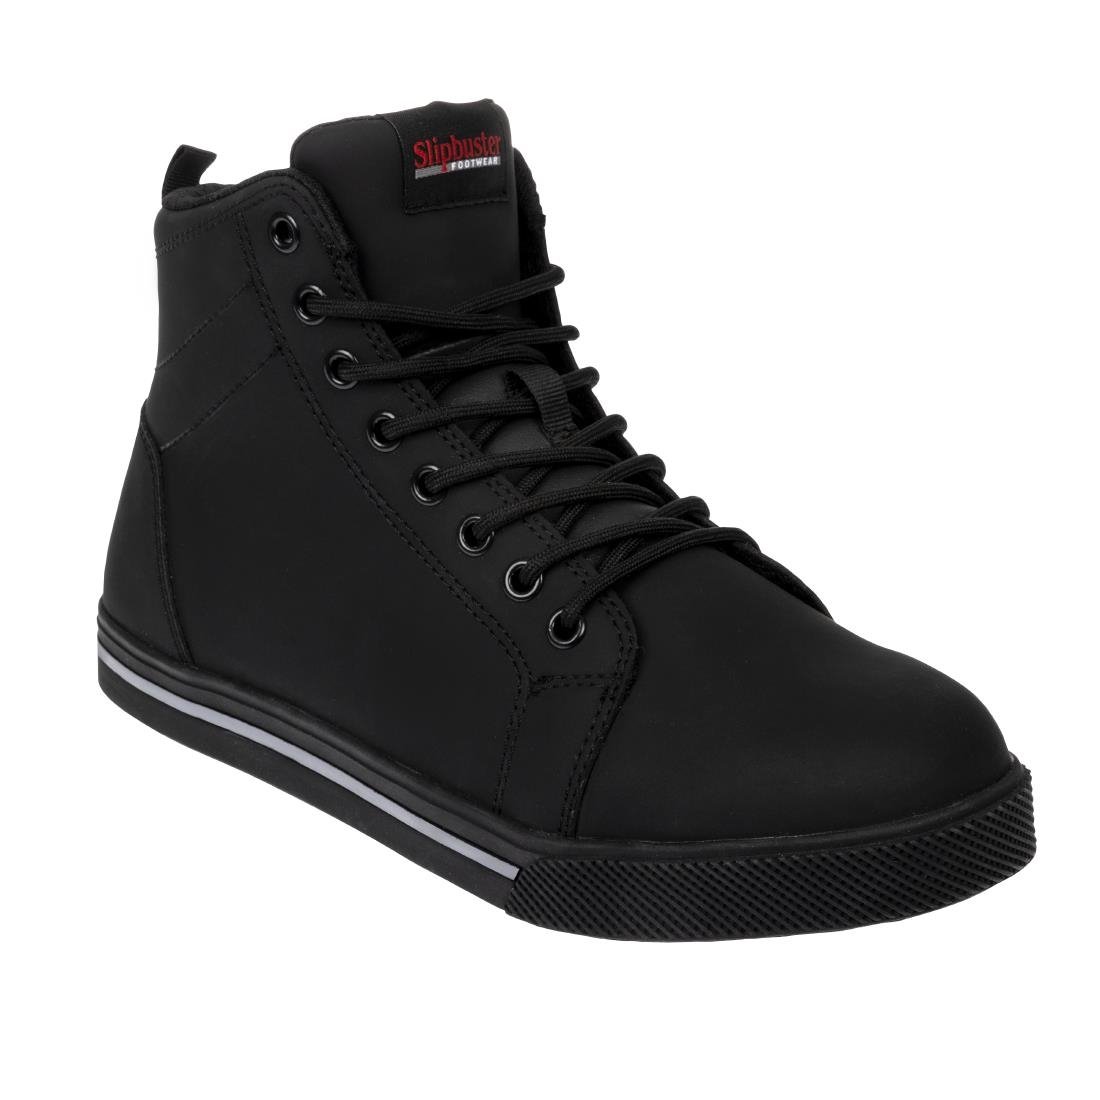 BA061-45 Slipbuster Recycled Microfibre Safety Hi Top Boots Matte Black 45 JD Catering Equipment Solutions Ltd